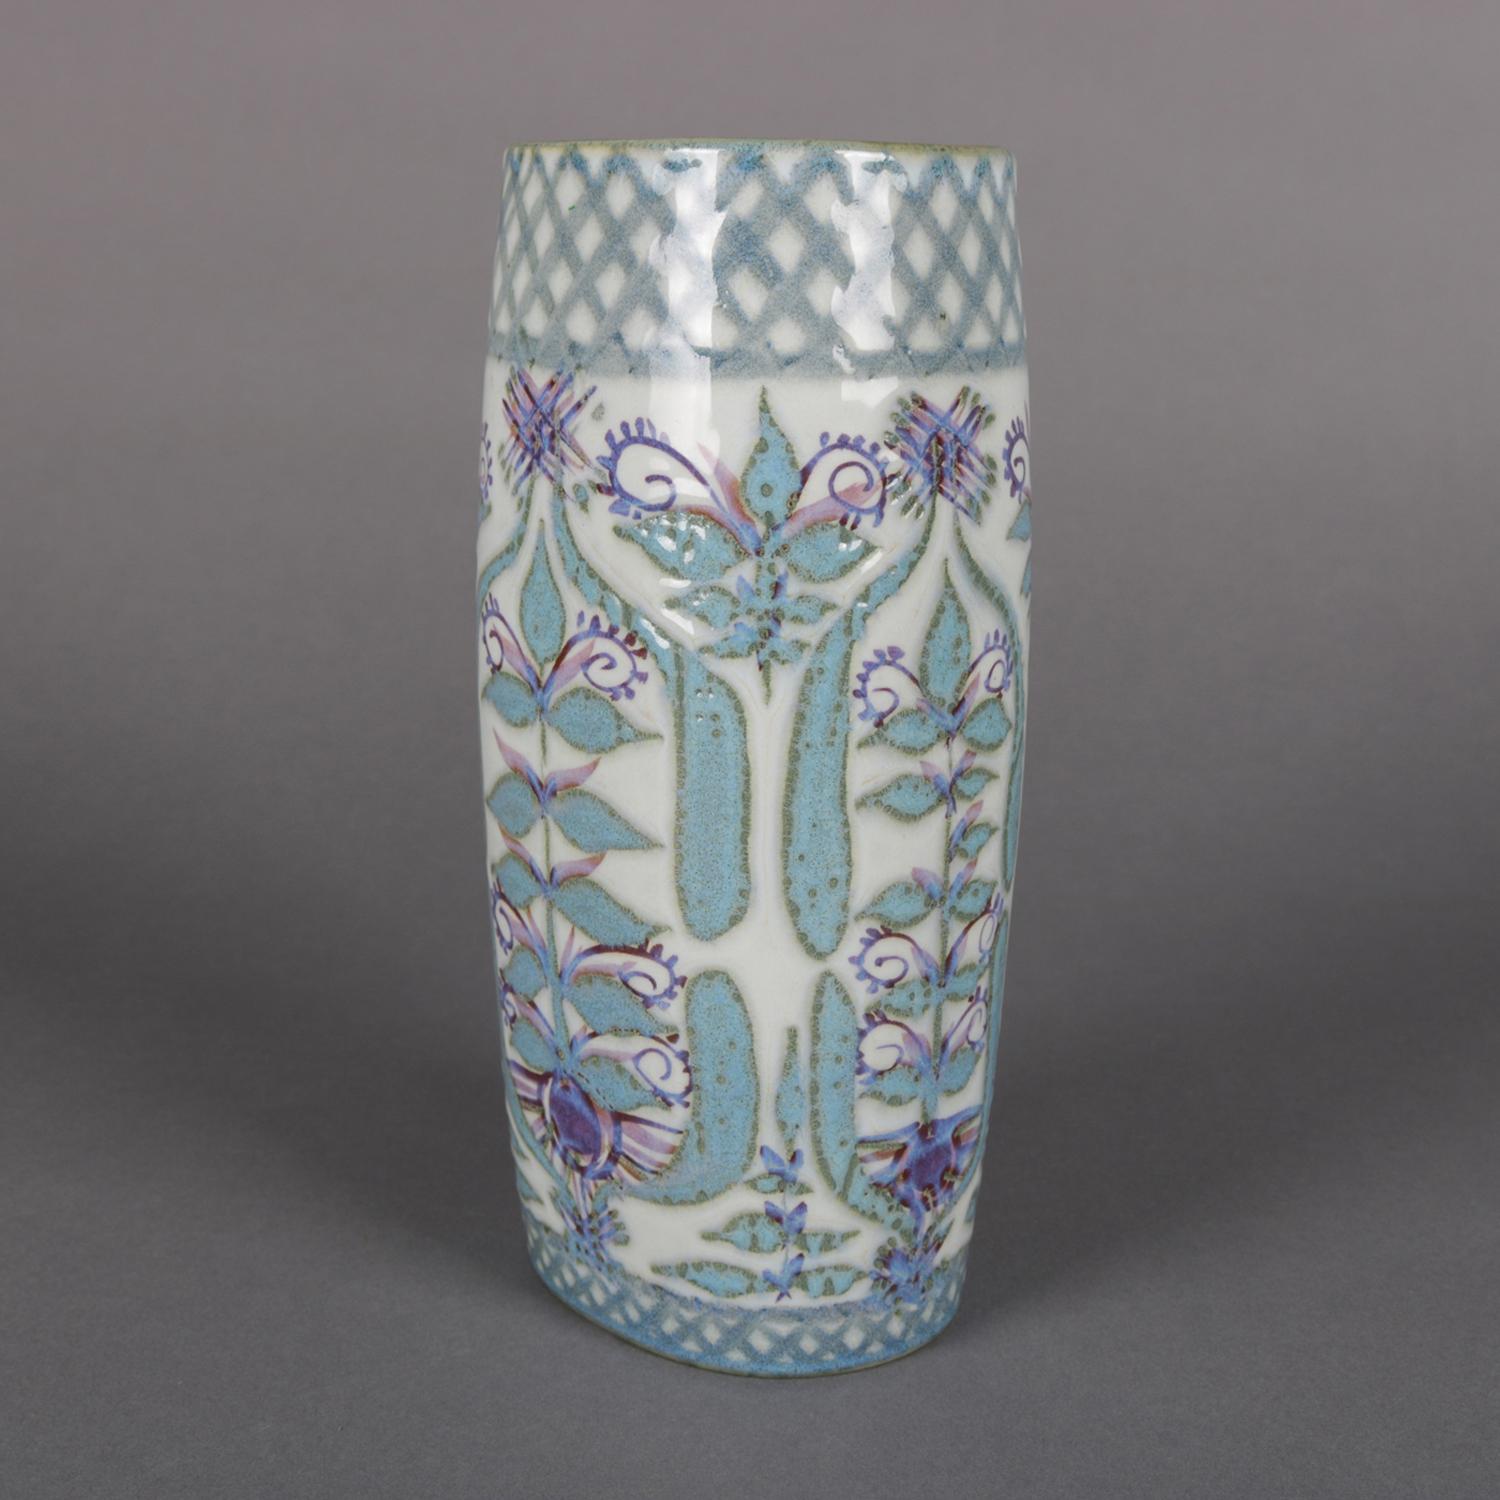 Midcentury Danish modern hand-painted Royal Copenhagen Aluminia Faience porcelain vase features all-over stylized floral and foliate design, Danish heavy porcelain painted vase, marked with beehive and artist signed Marianne Johnson on base, 20th